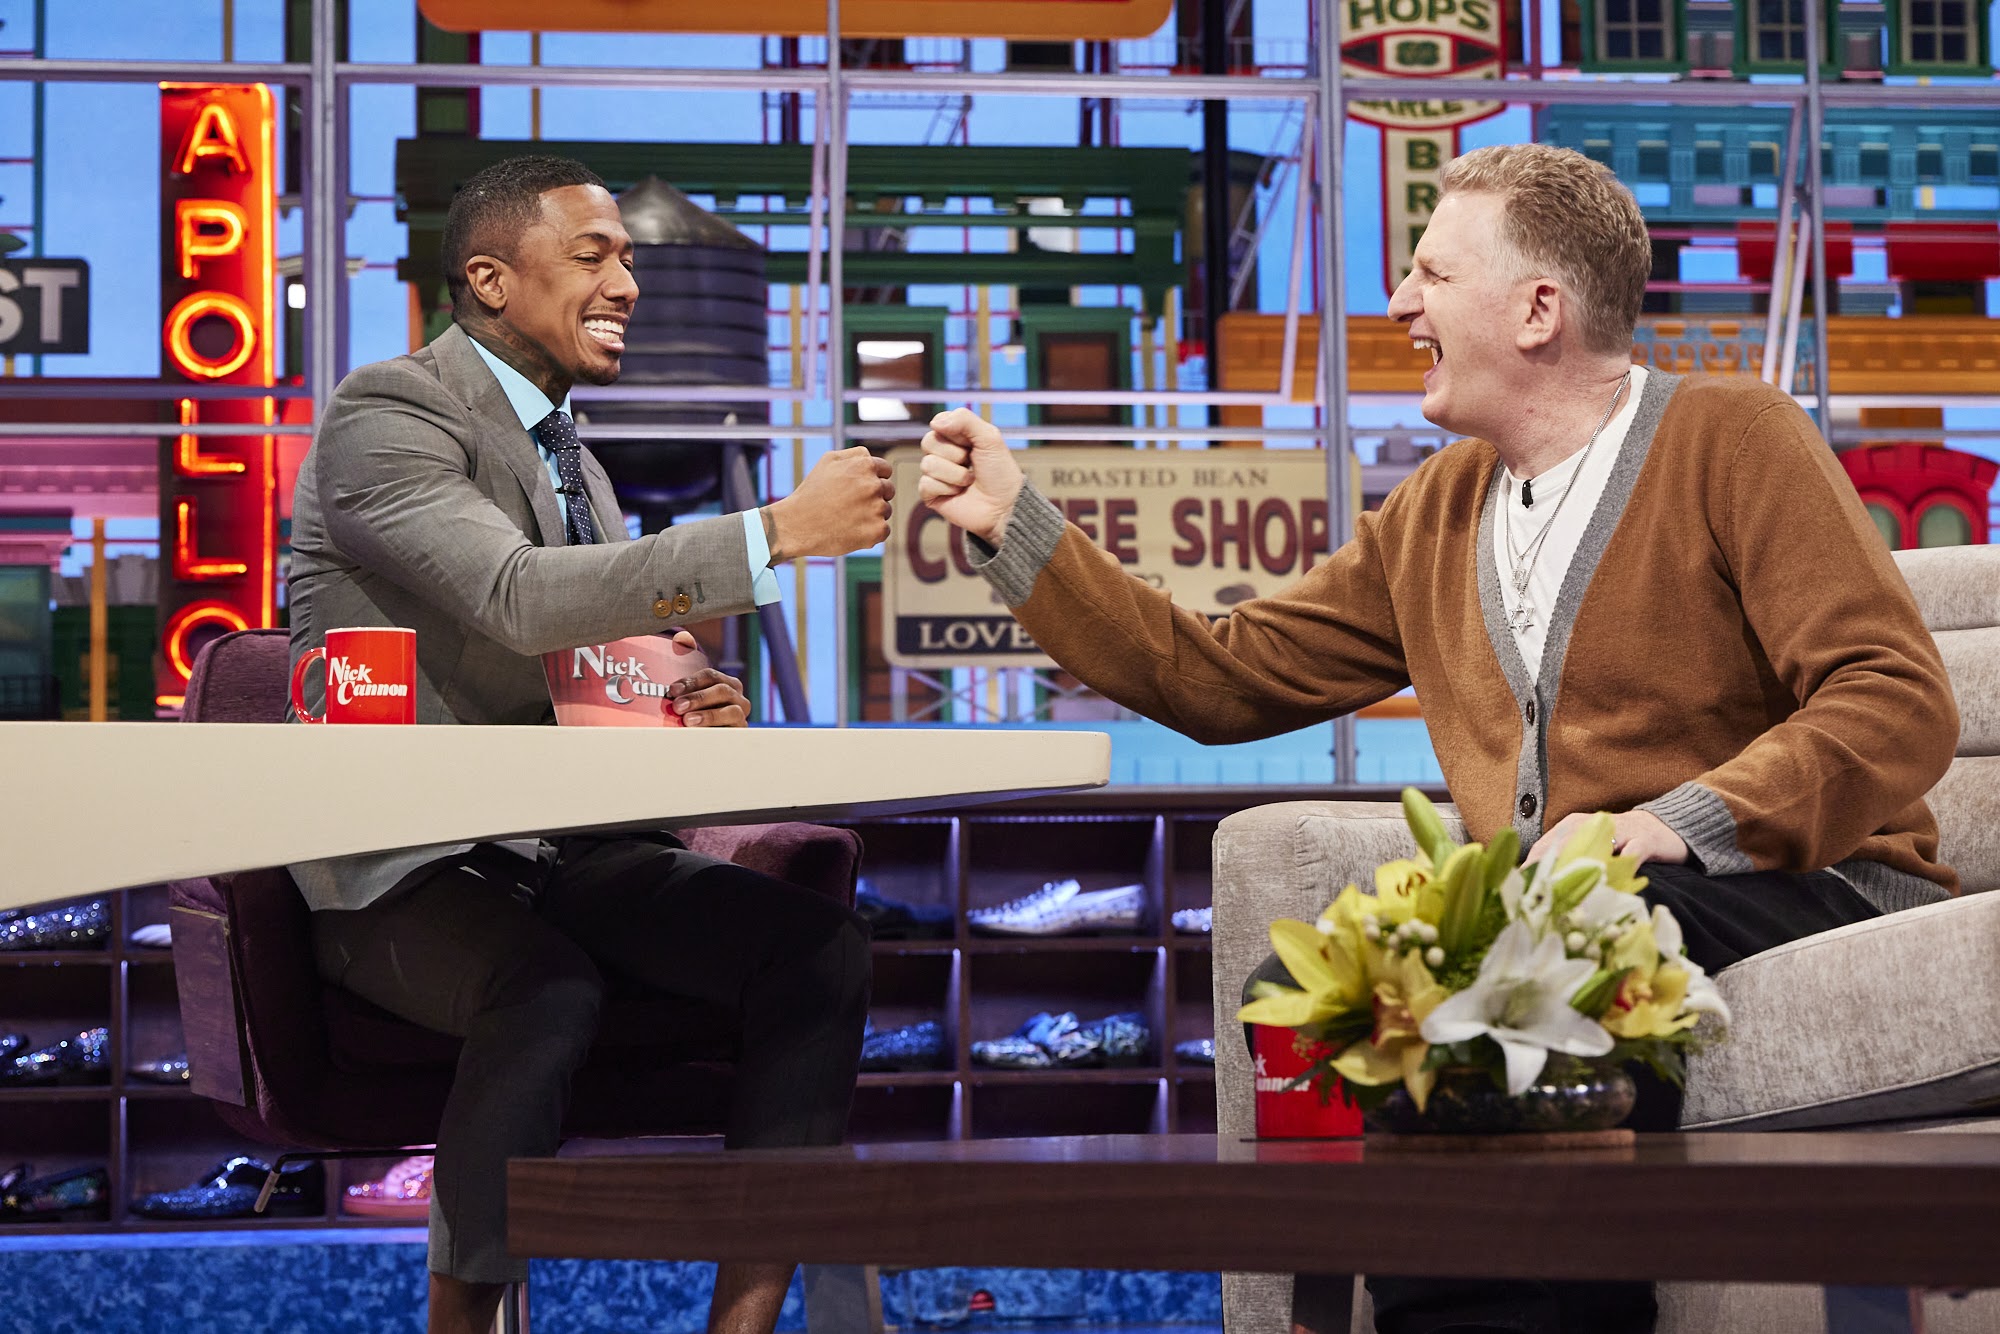 In Case You Missed It: Nick Cannon And Michael Rapaport Chat About His Love Of Reality Tv & More